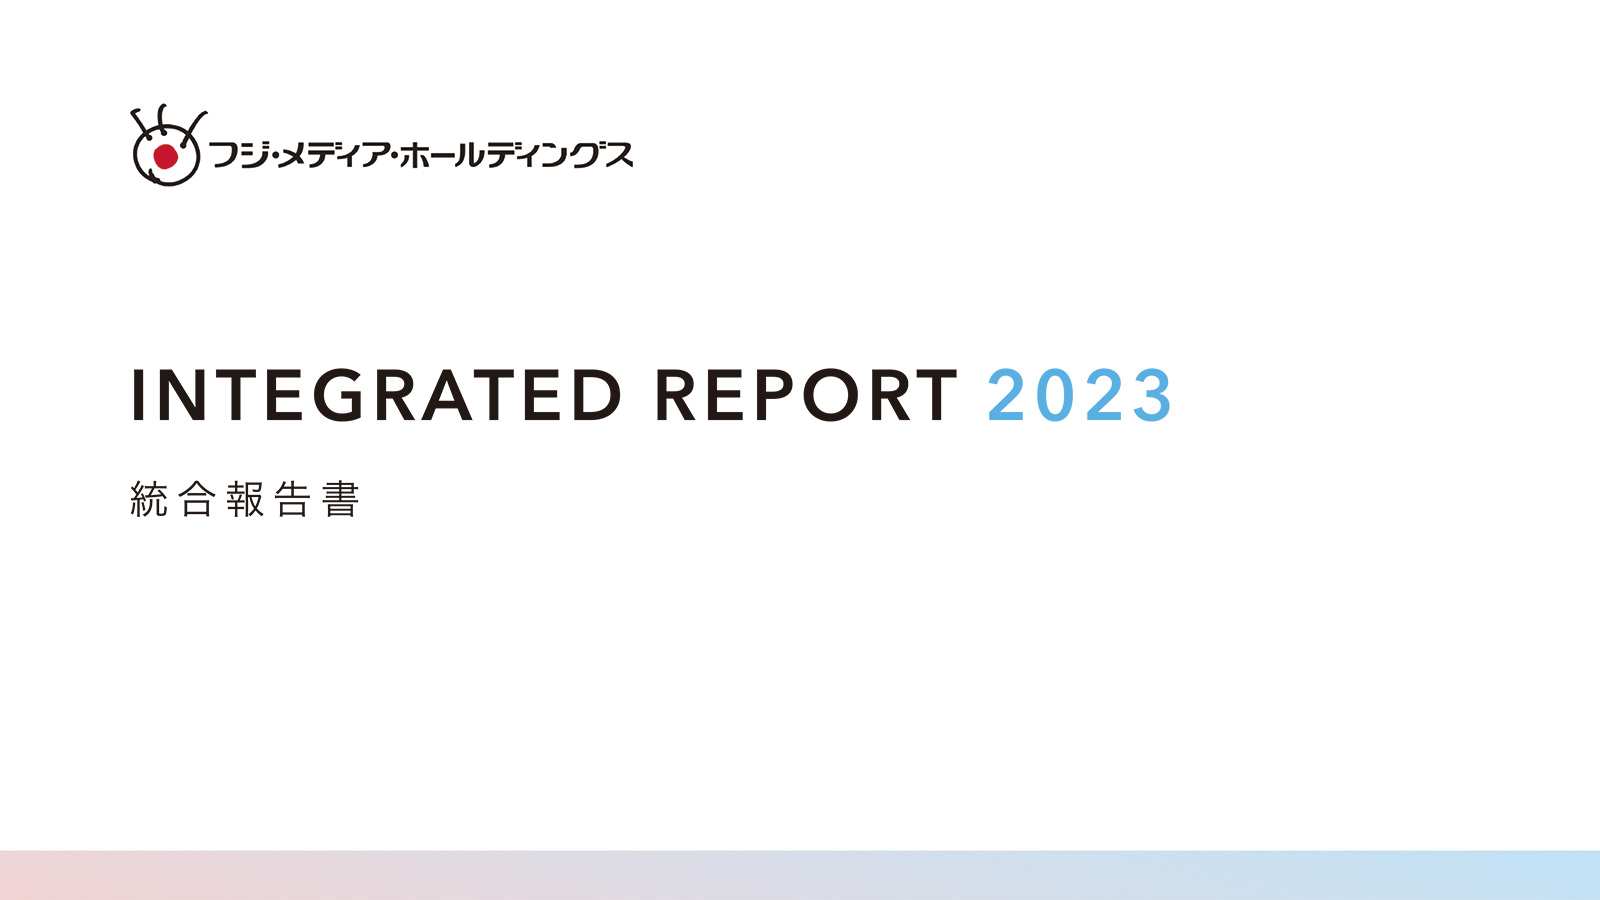 INTEGRATED REPORT 2023 統合報告書